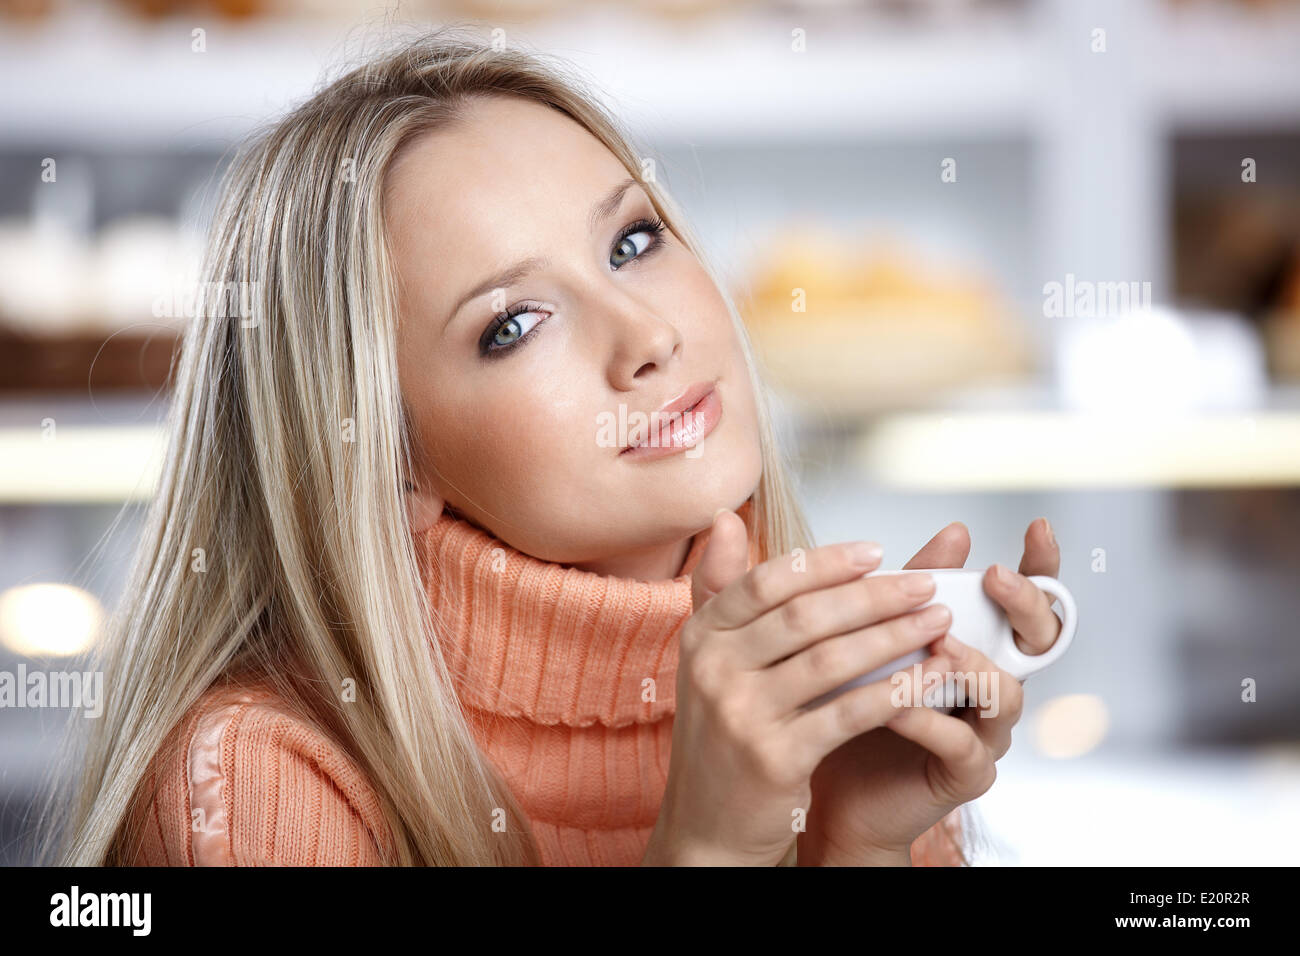 The young beautiful girl with a cup Stock Photo